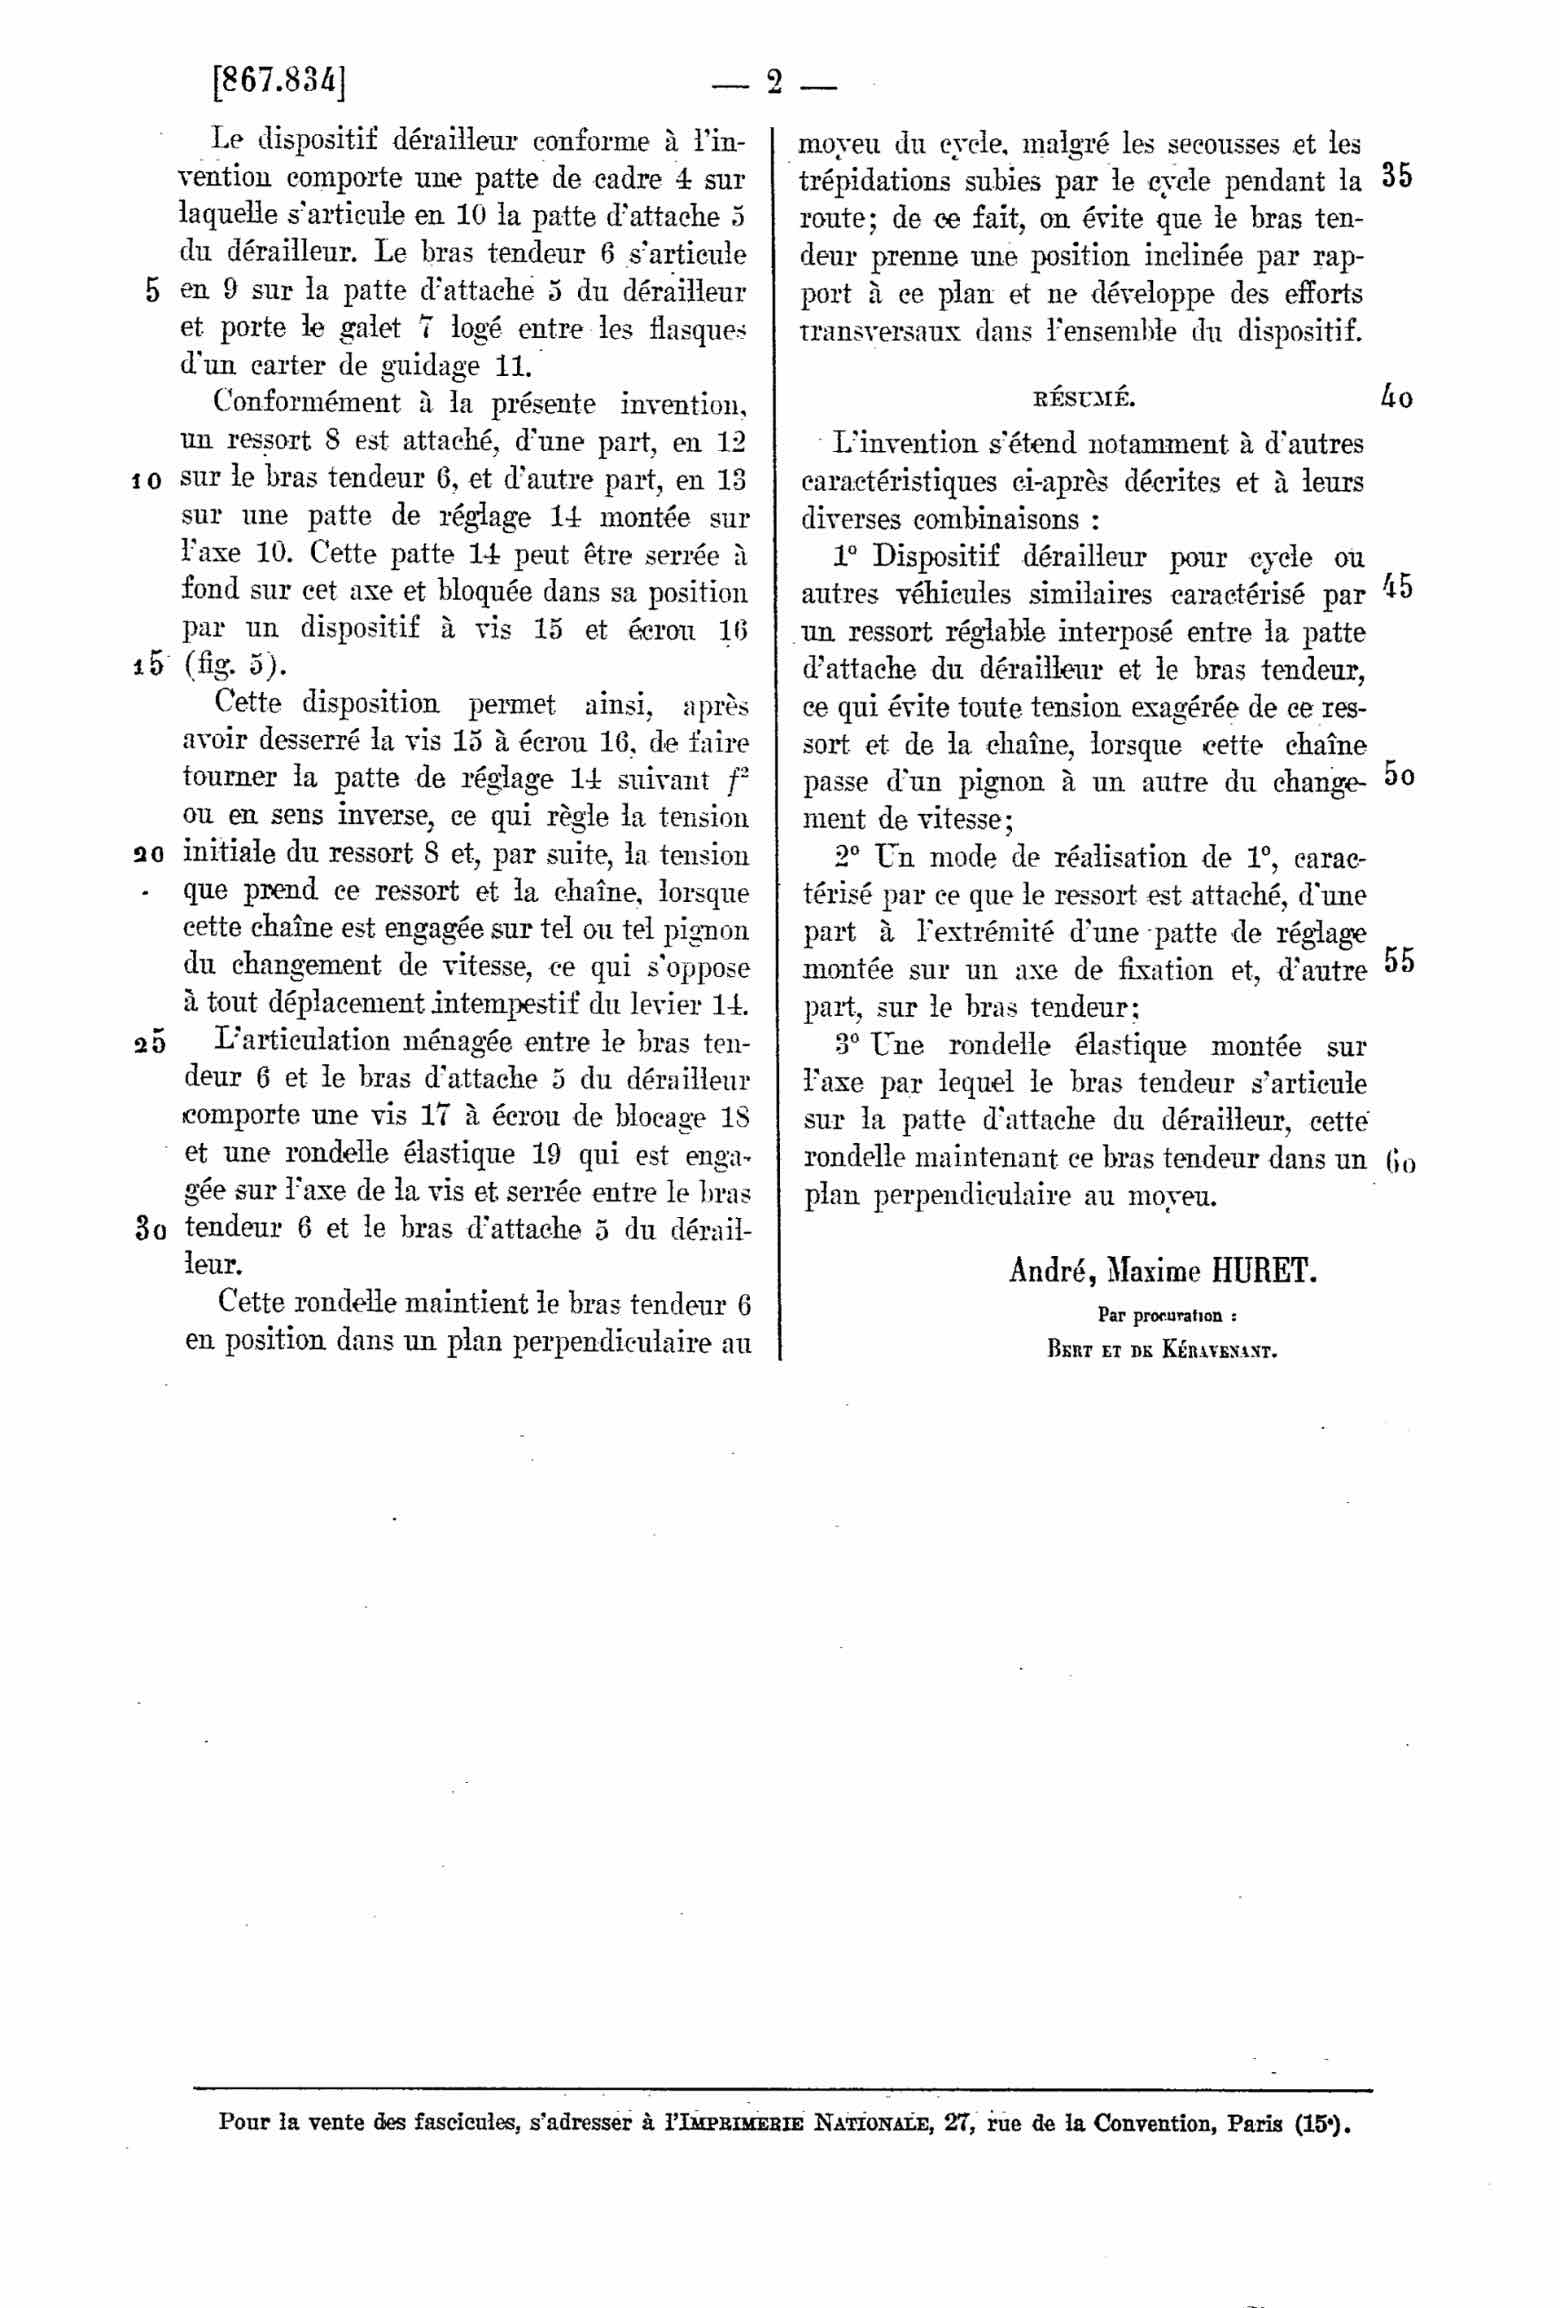 French Patent 867,834 - Huret scan 2 main image